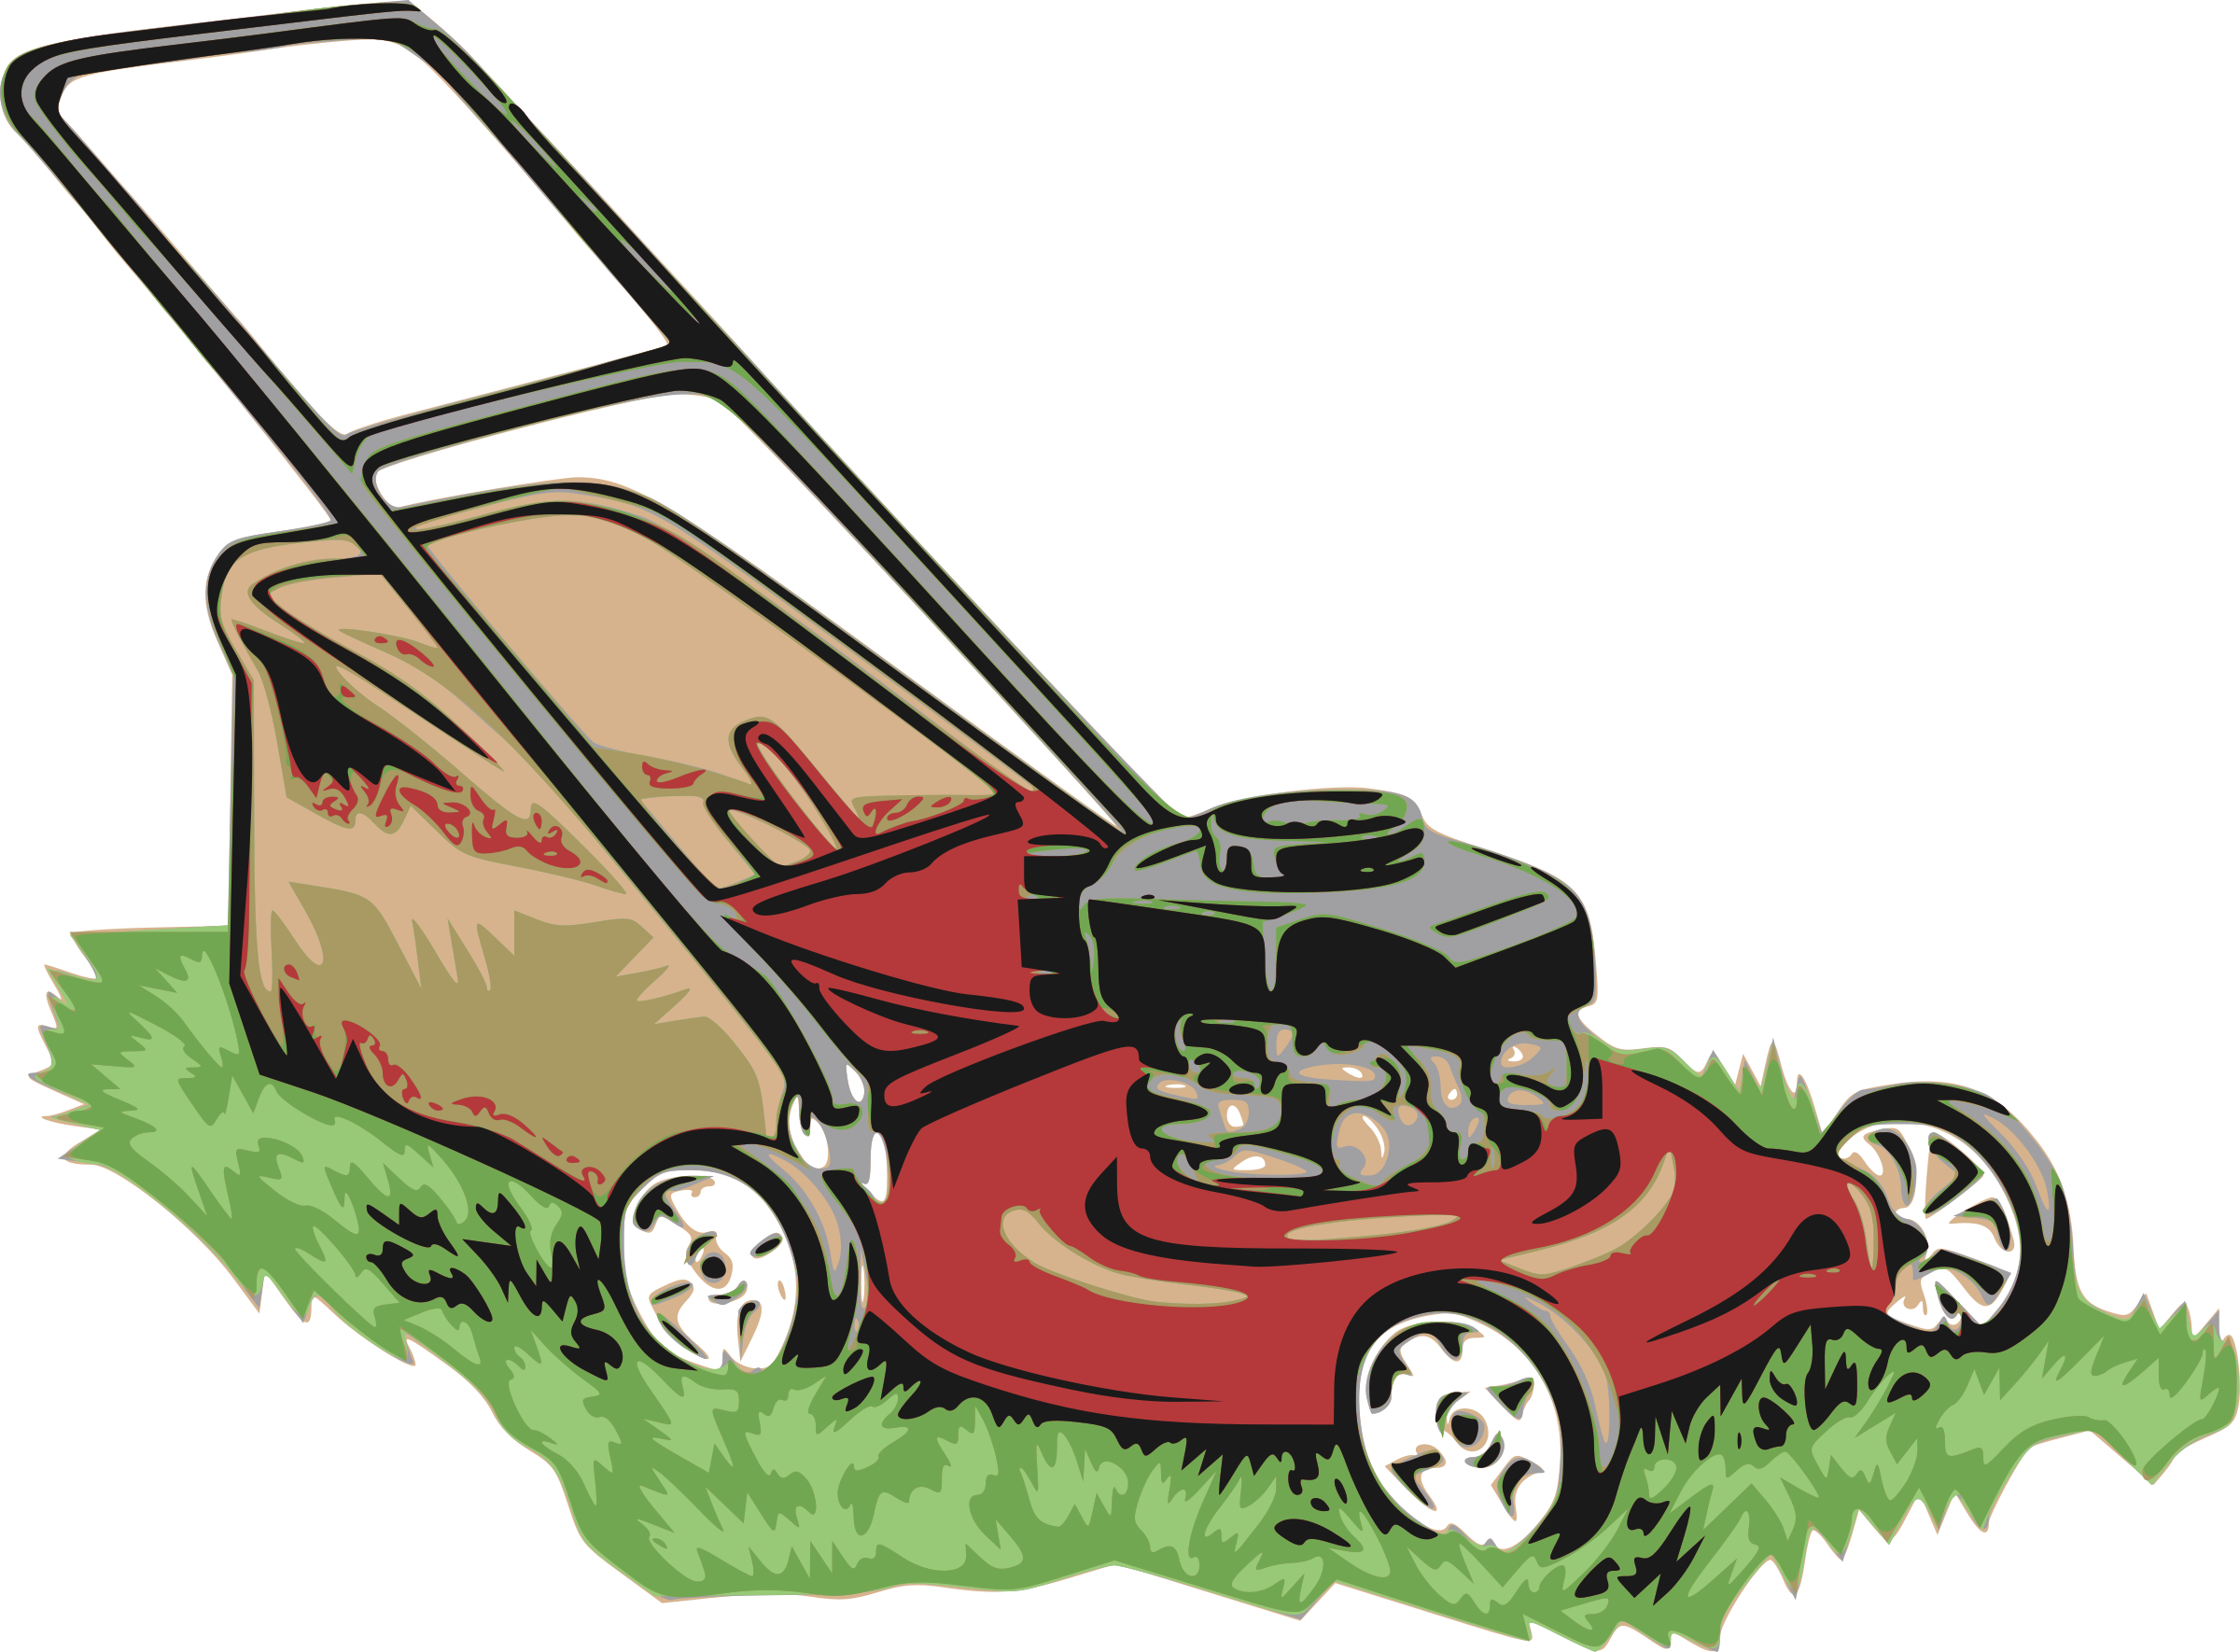 Mow The Lawn Png - Displaying 20 Images For Lawn Mower Clipart Png, Transparent background PNG HD thumbnail